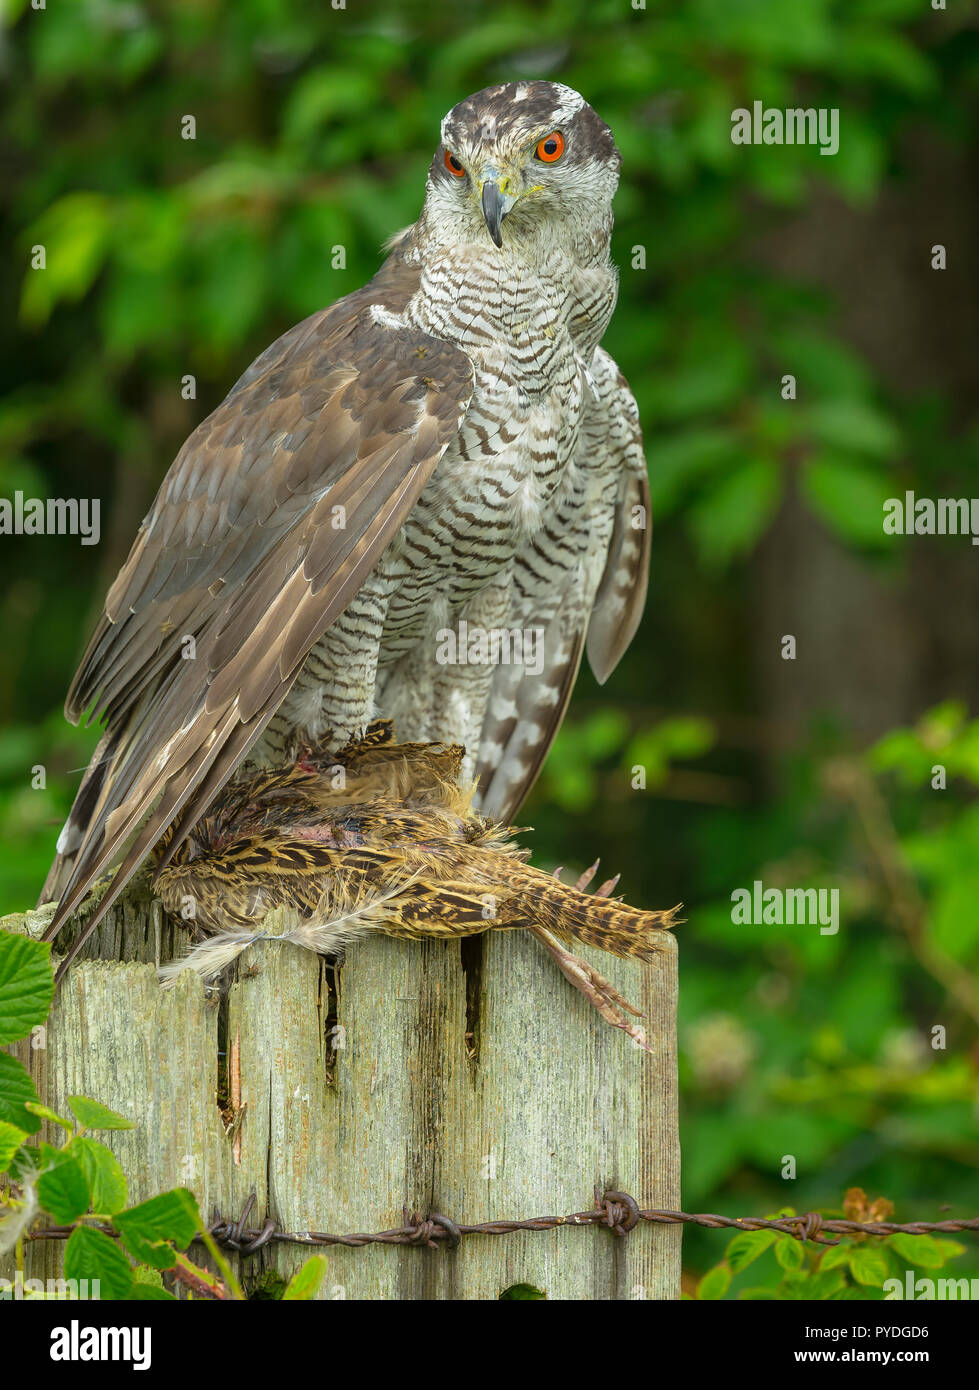 Goshawk (Scientific name: Accipiter gentilis). Large raptor, this is a captive Goshawk perched on a fence post and feeding on a partridge. Portrait Stock Photo